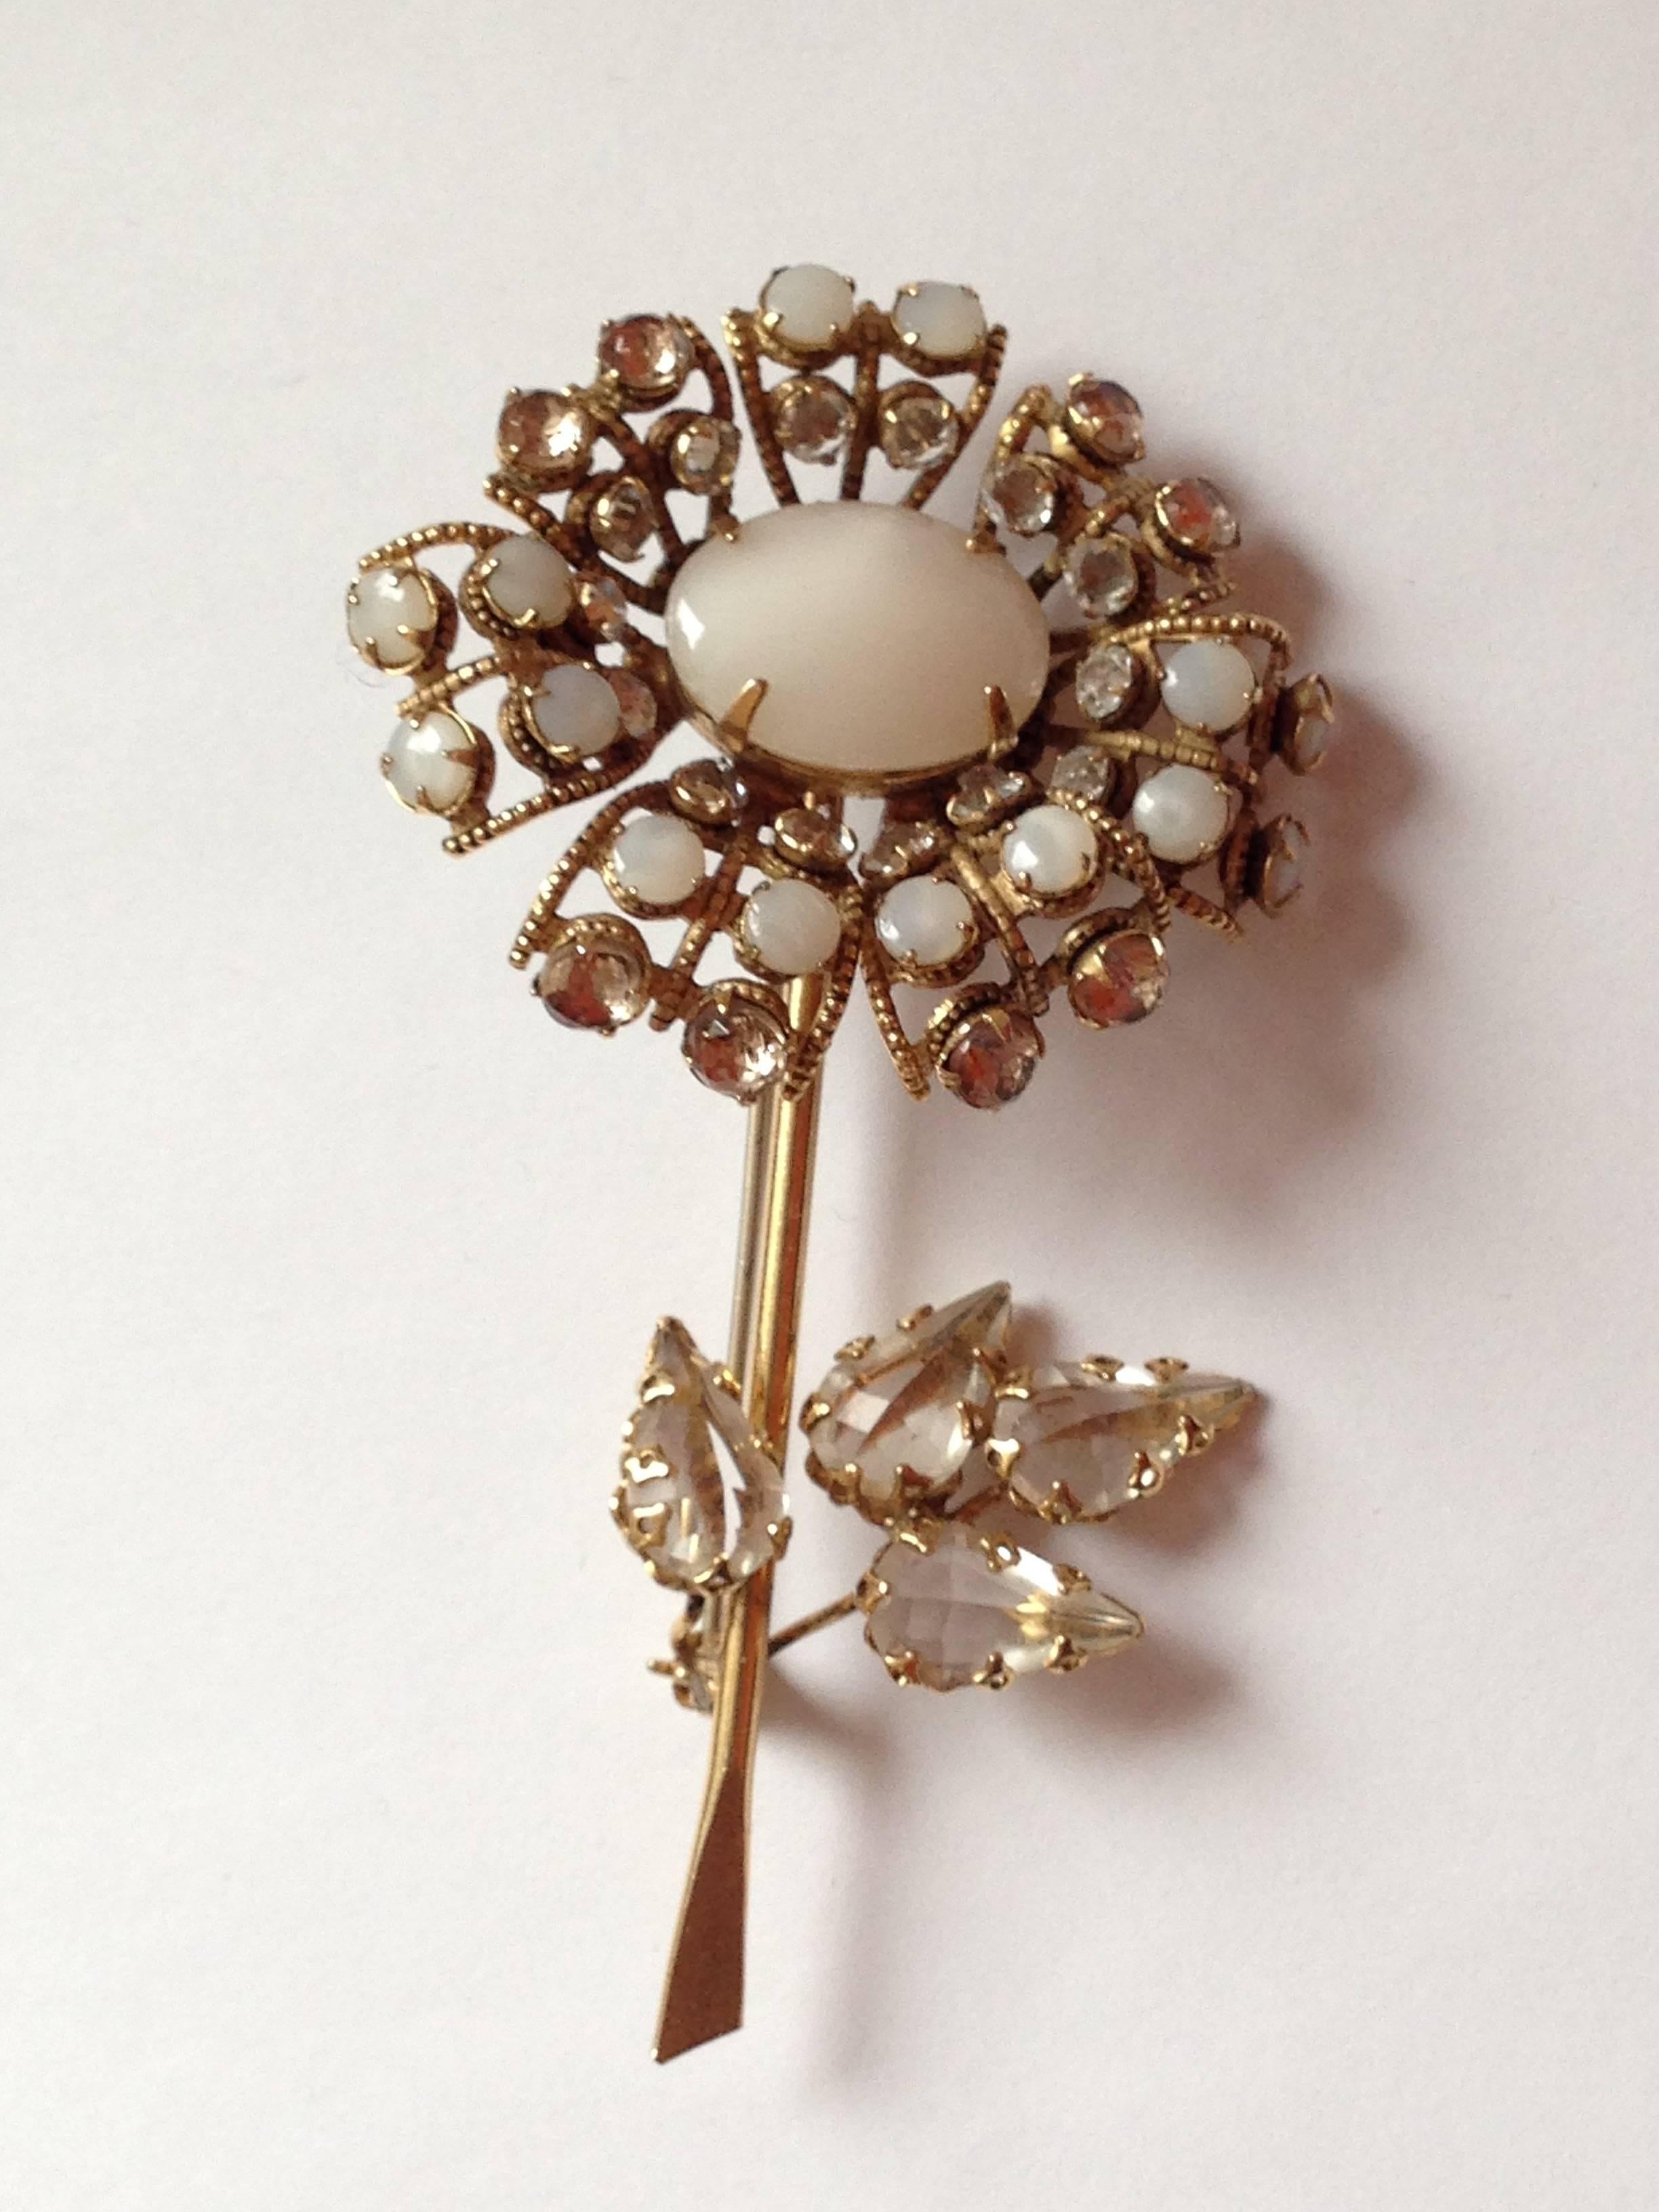 This 1950s Schreiner brooch is in the shape of a single flower. It features clear and opaque stones. The leaves are set with the pointed side out - a Schreiner signature. It is signed 'Schreiner New York' on a plaque on the back. It is 3 3/8